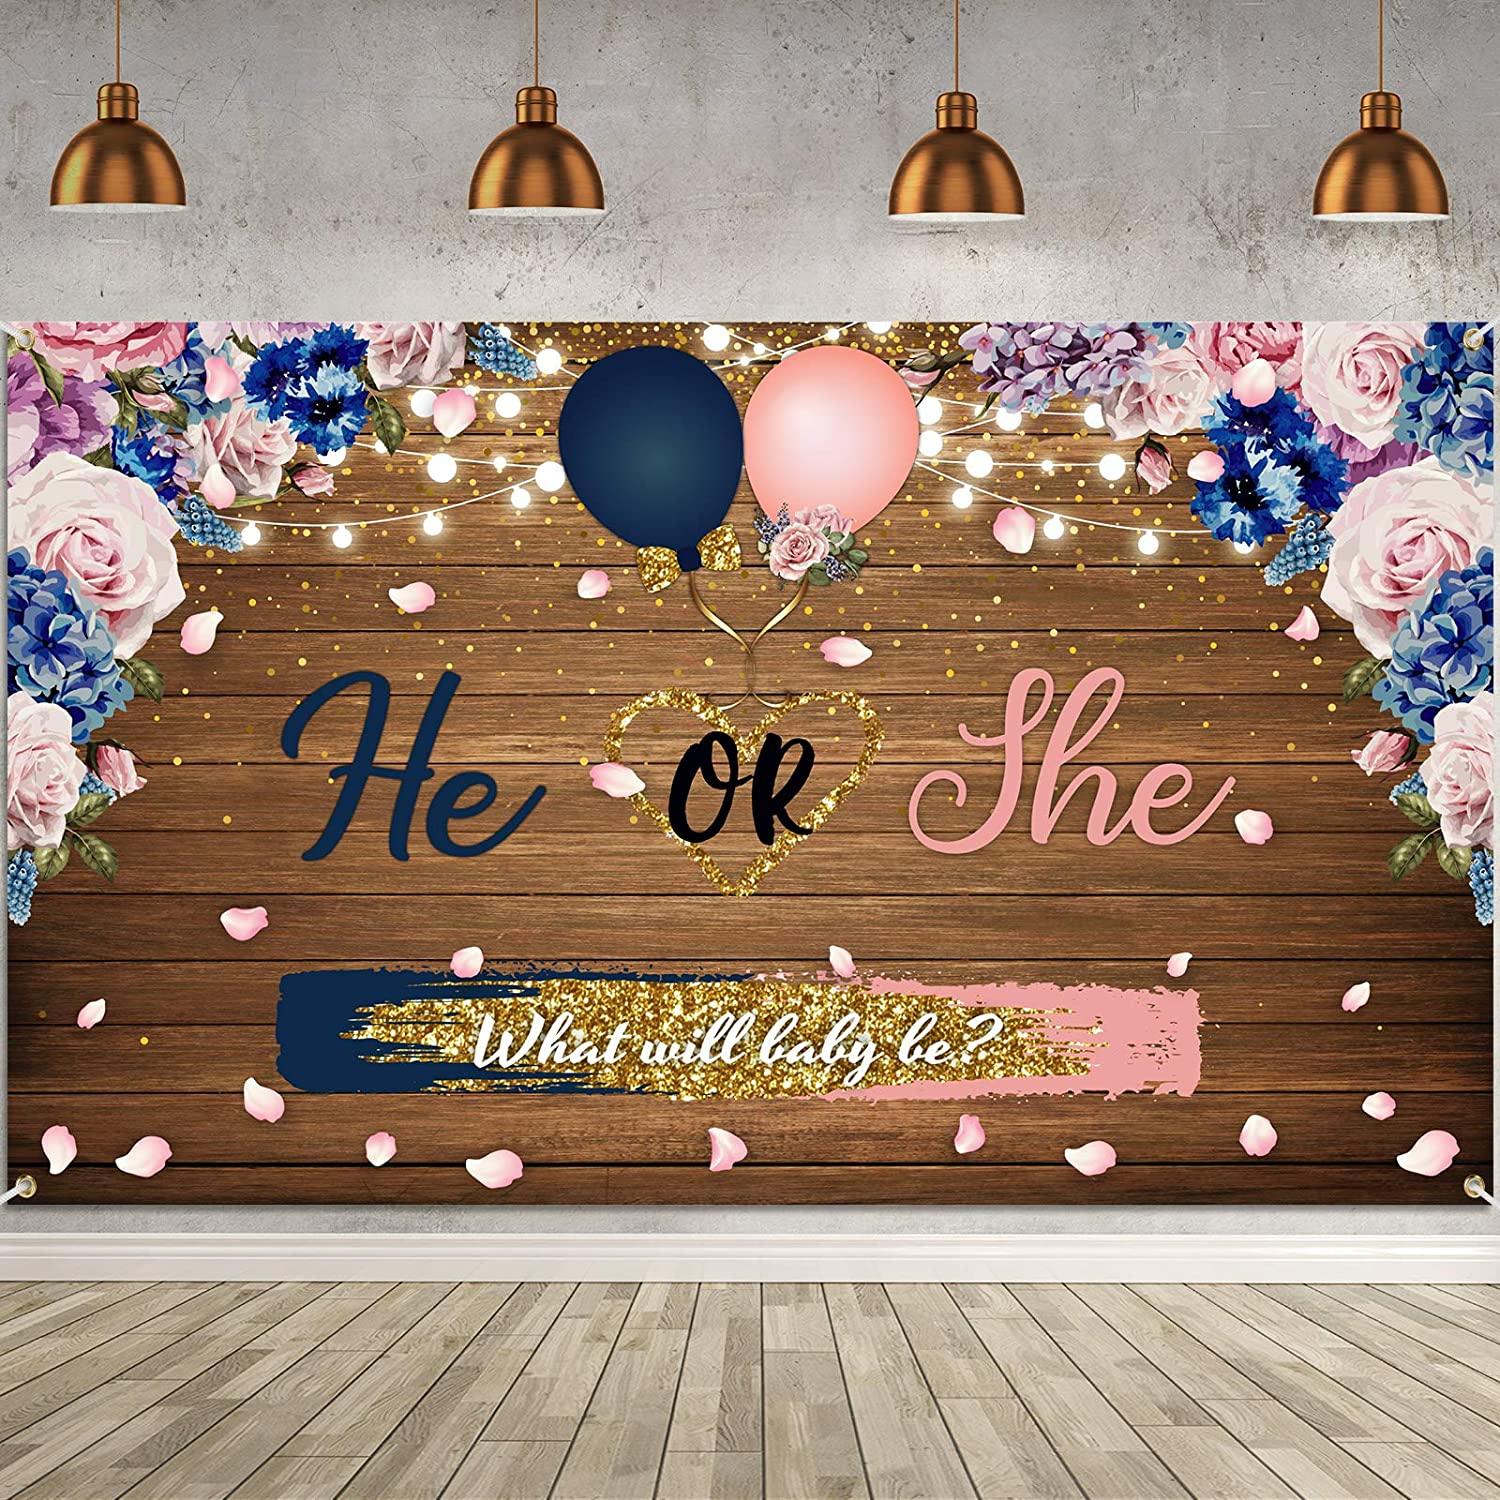 Gender Reveal Decorations Backdrop Banner He or She What Will Baby be Wooden Baby Gender Photography Background - Hibrides